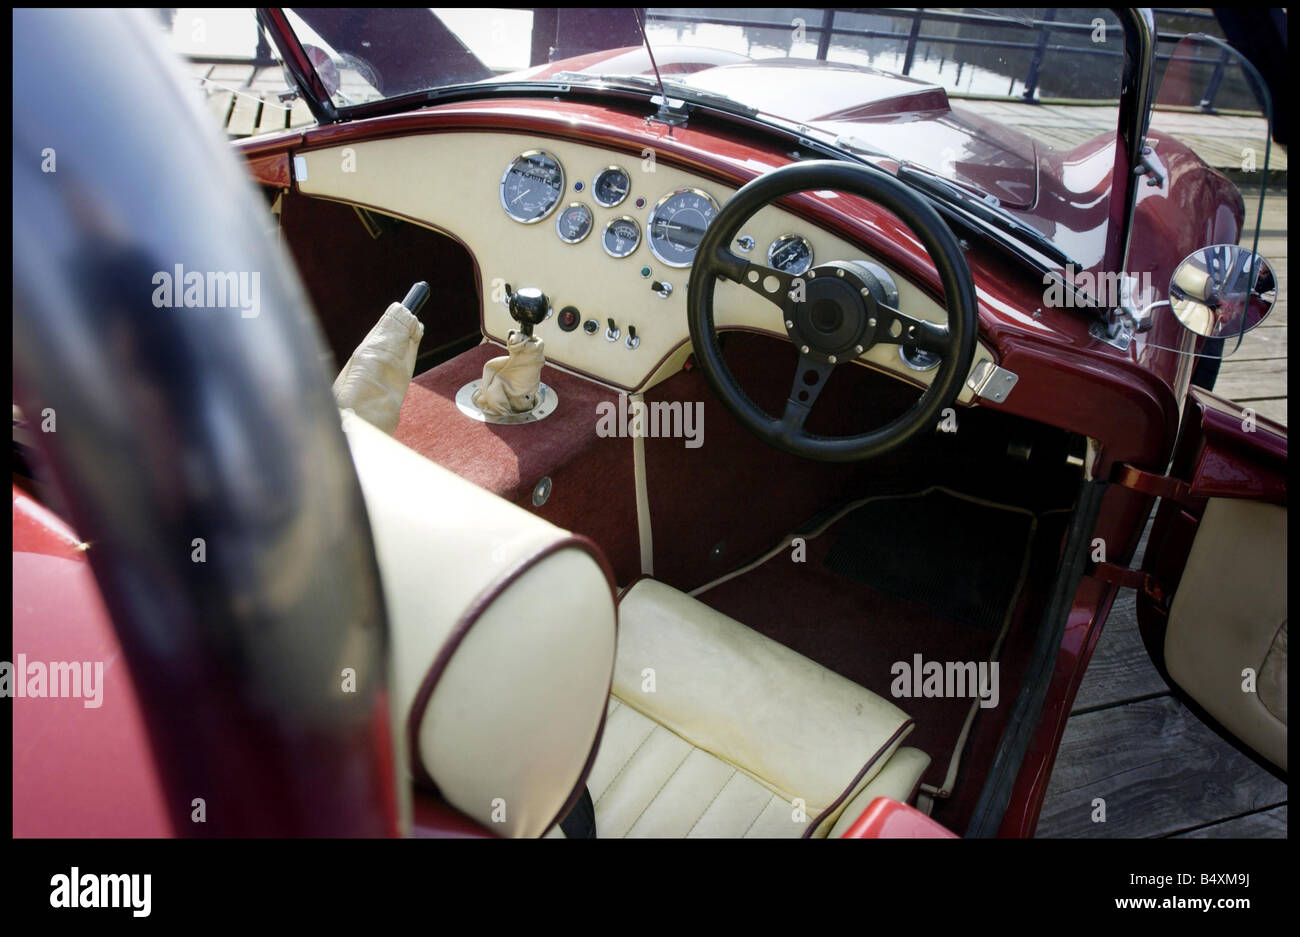 Replica AC Cobra photographed for Road Record feature Stock Photo - Alamy